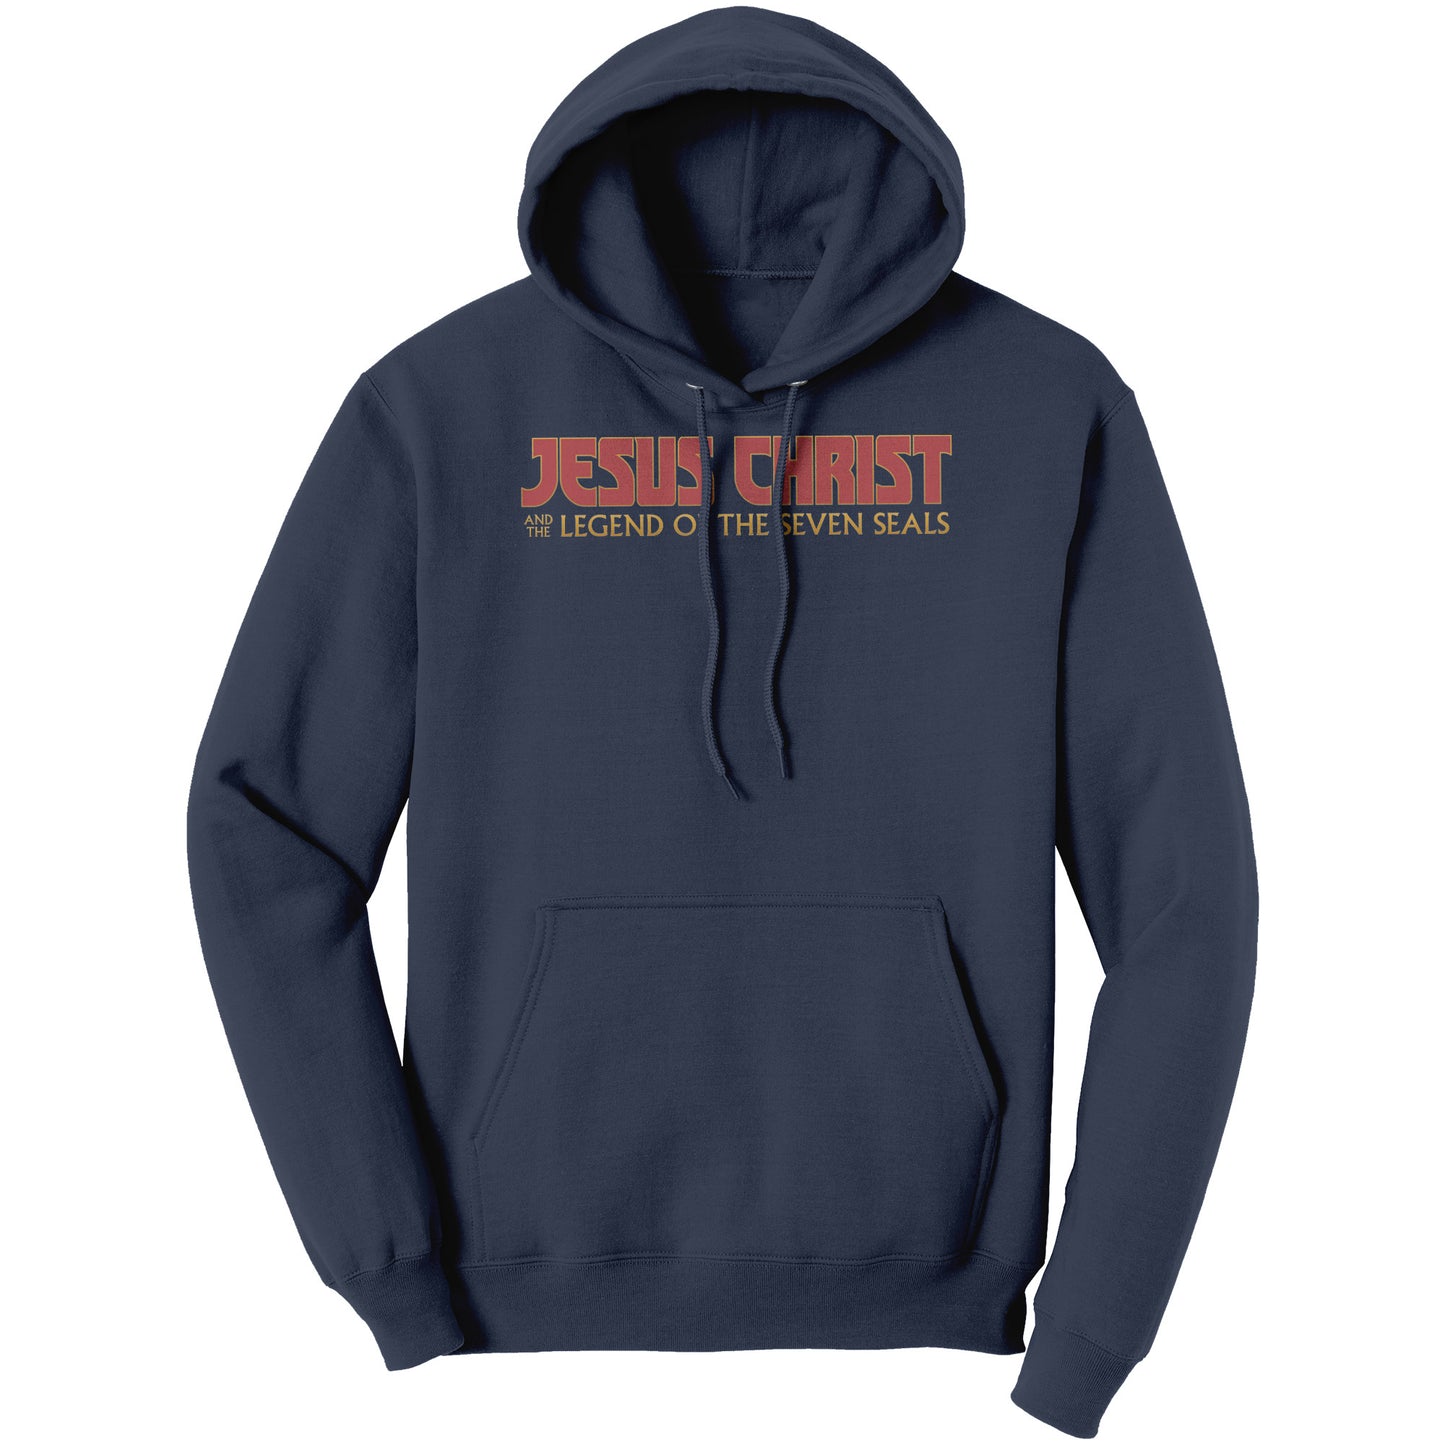 Jesus Christ and the Legend of the Seven Seals Hoodie